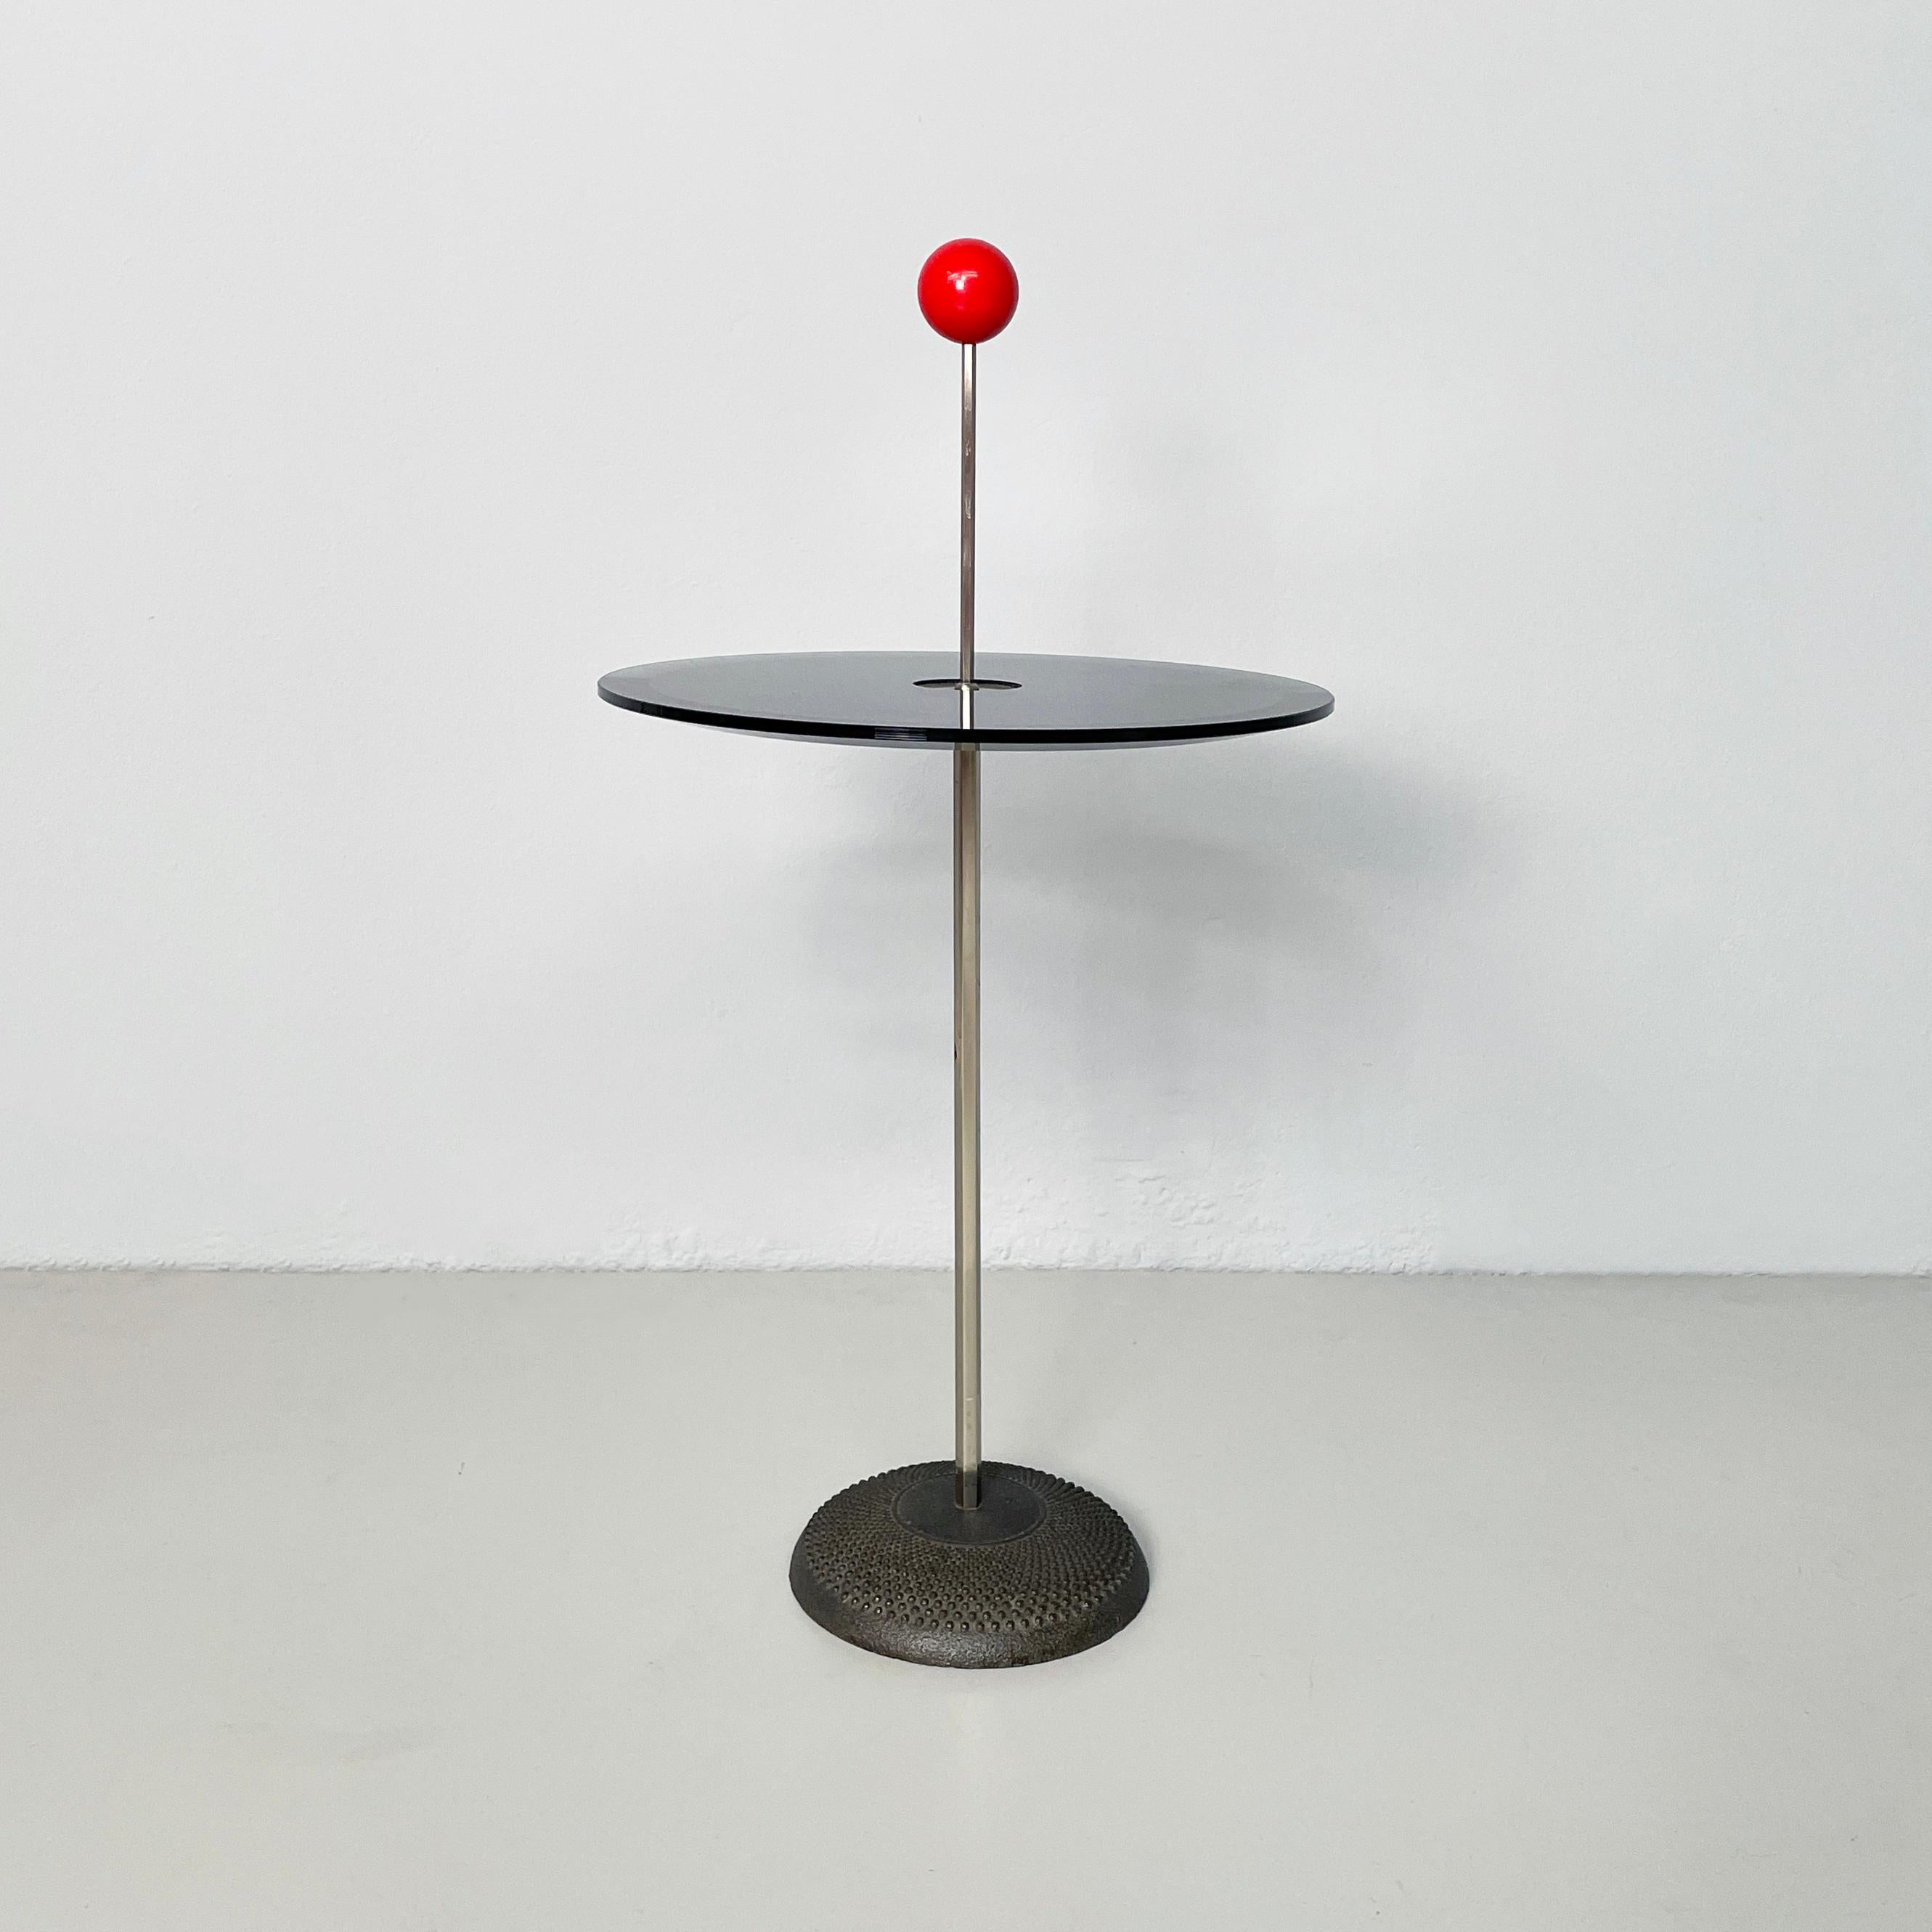 Italian modern Coffee table Orio by Pierluigi Cerri for Fontana Arte, 1980s
Coffee table mod. Orio with round top in smoked glass with bevelled edge. The metal structure features a spherical red resin handle. The round base is made of worked cast